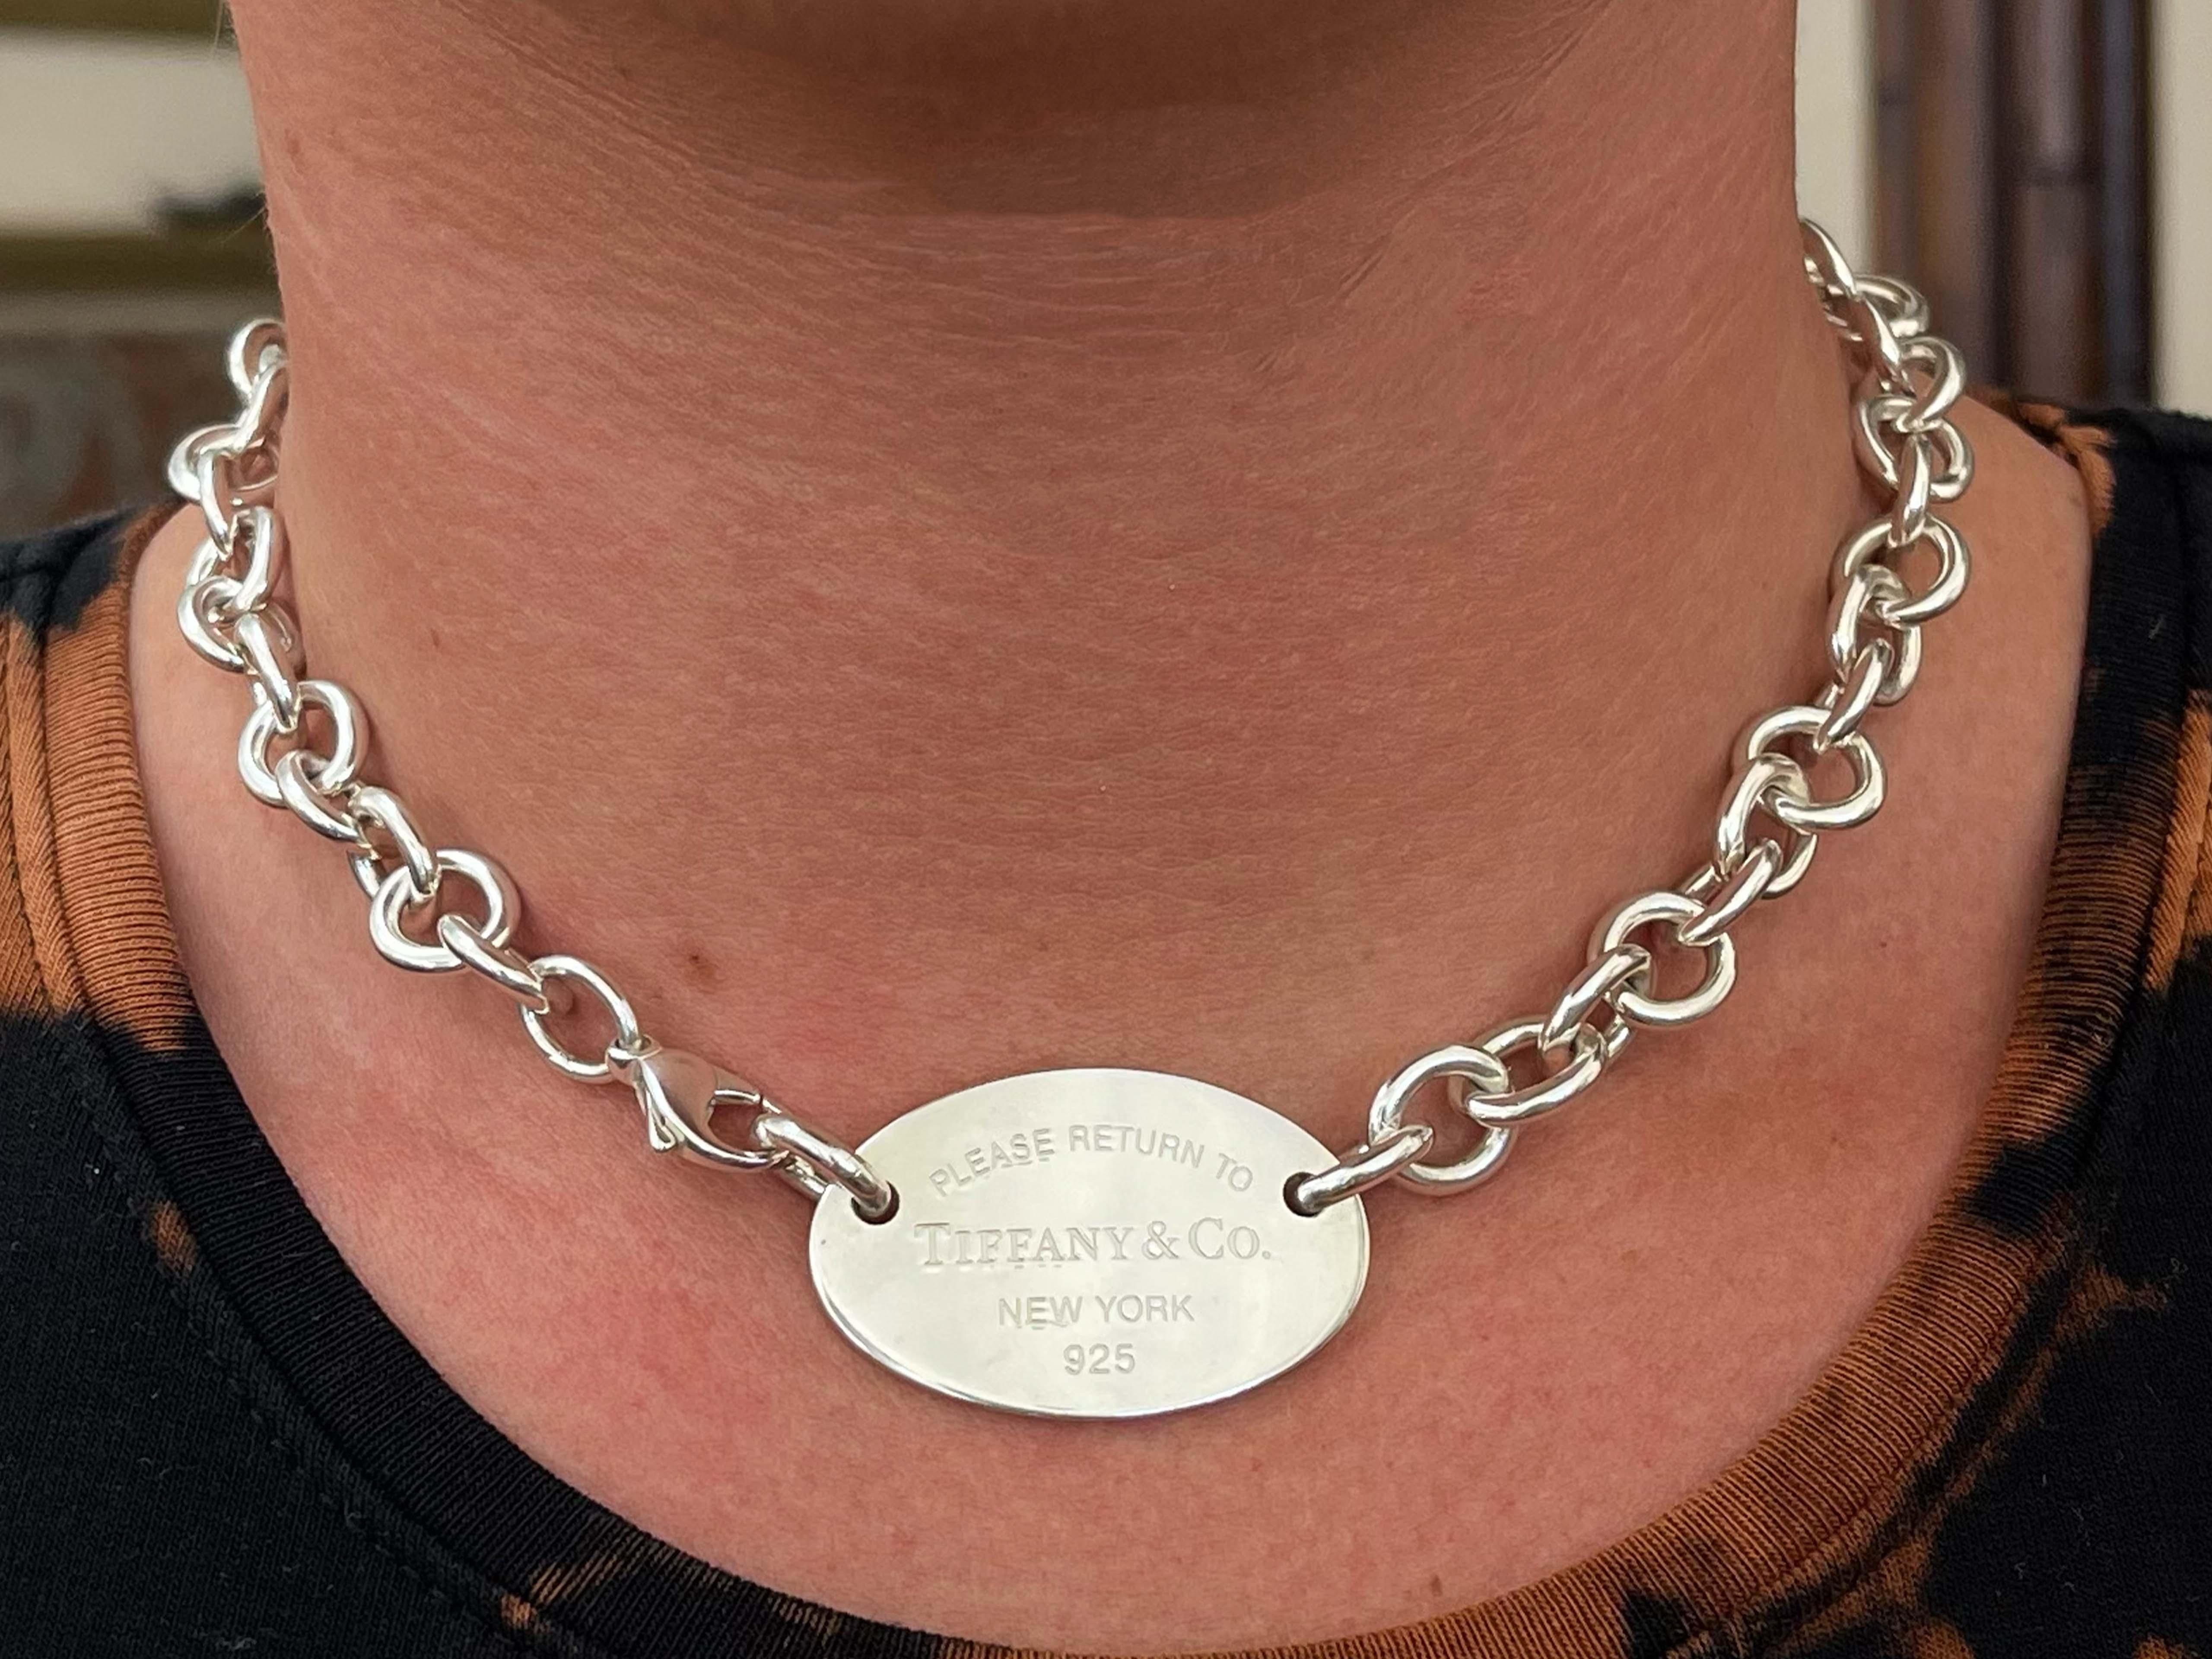 Modern Please Return to Tiffany & Co. Oval Tag Necklace Sterling Silver